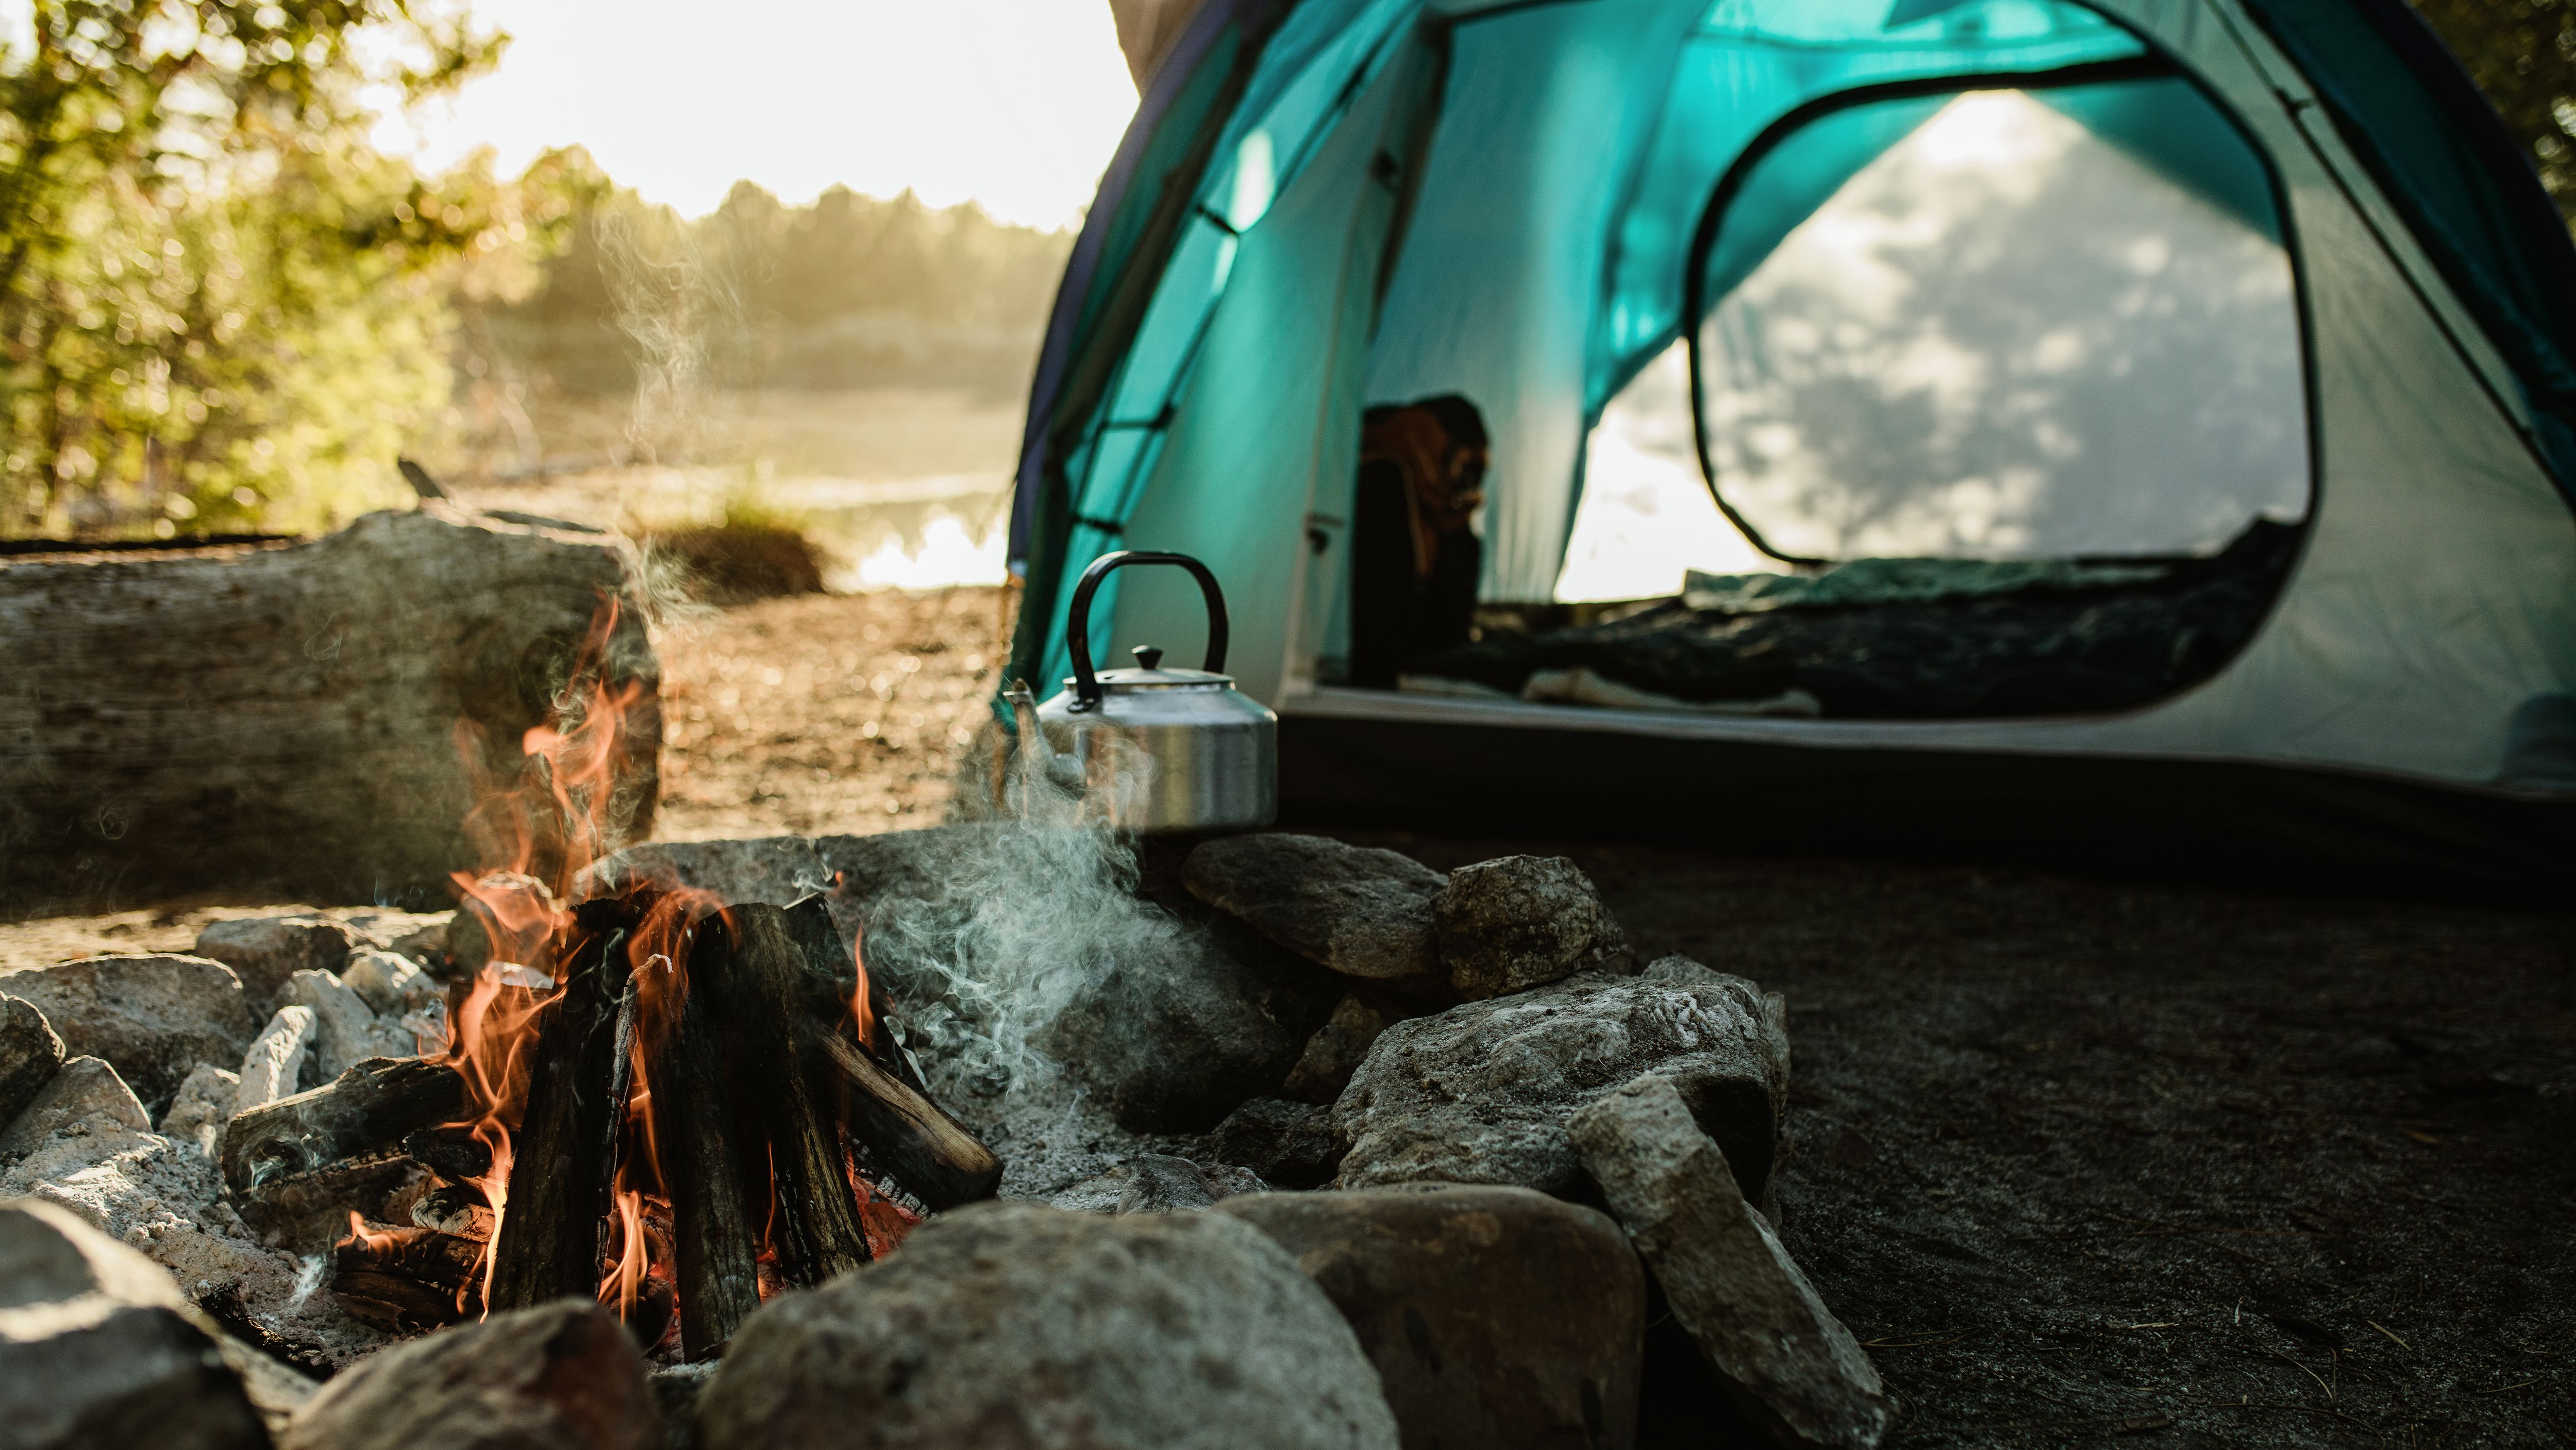 Essential Camp Gear for Camping in the Desert